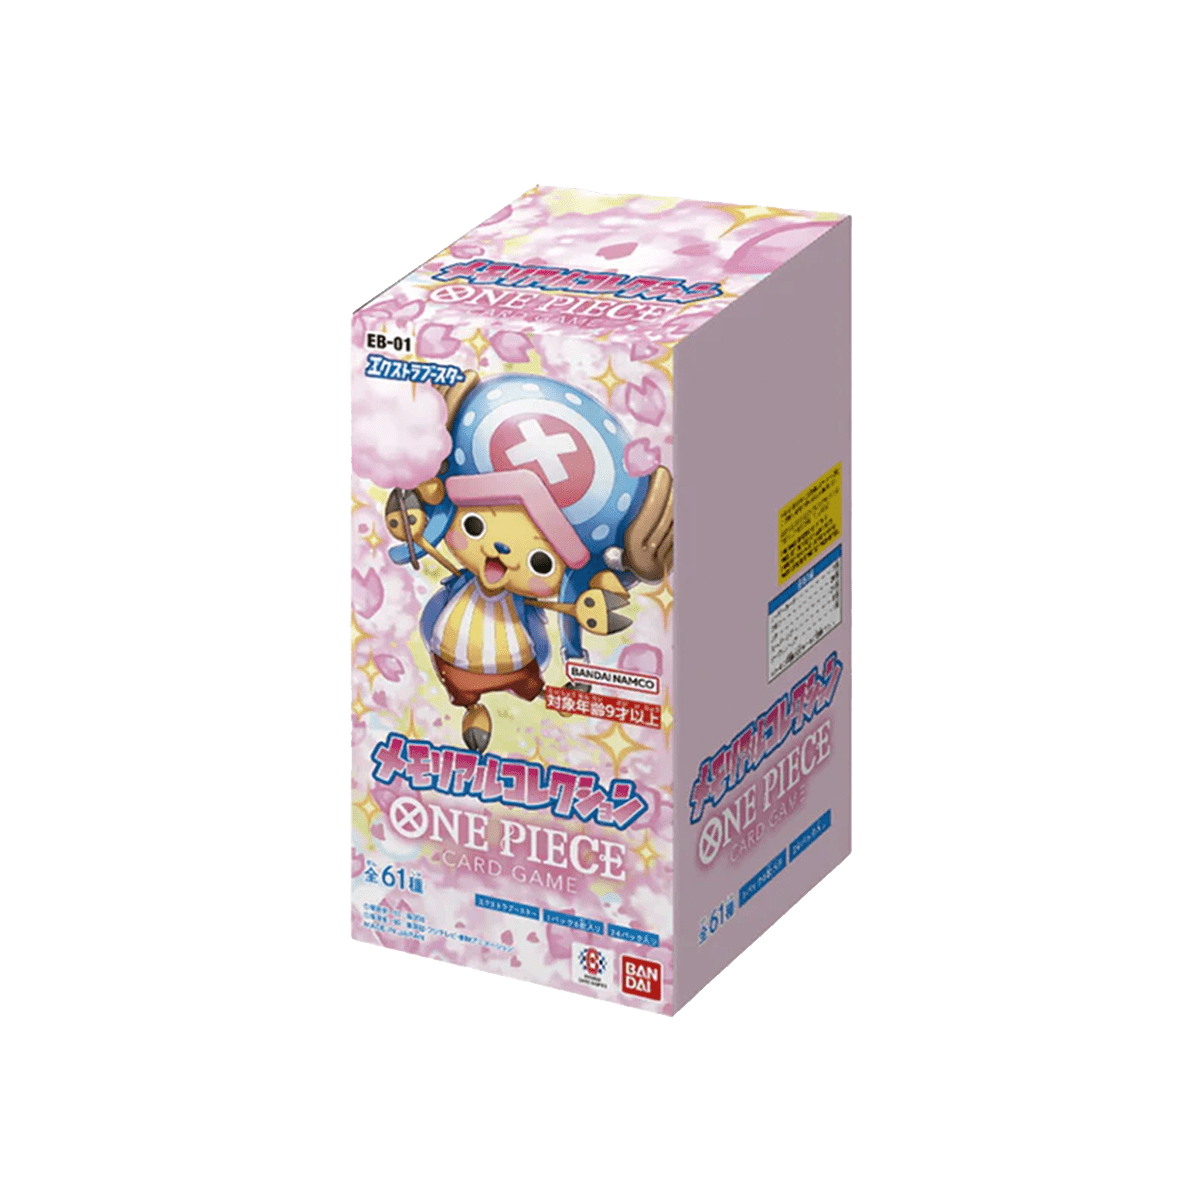 One Piece - Memorial Collection Booster Box - EB-01 - Cardmaniac.ch